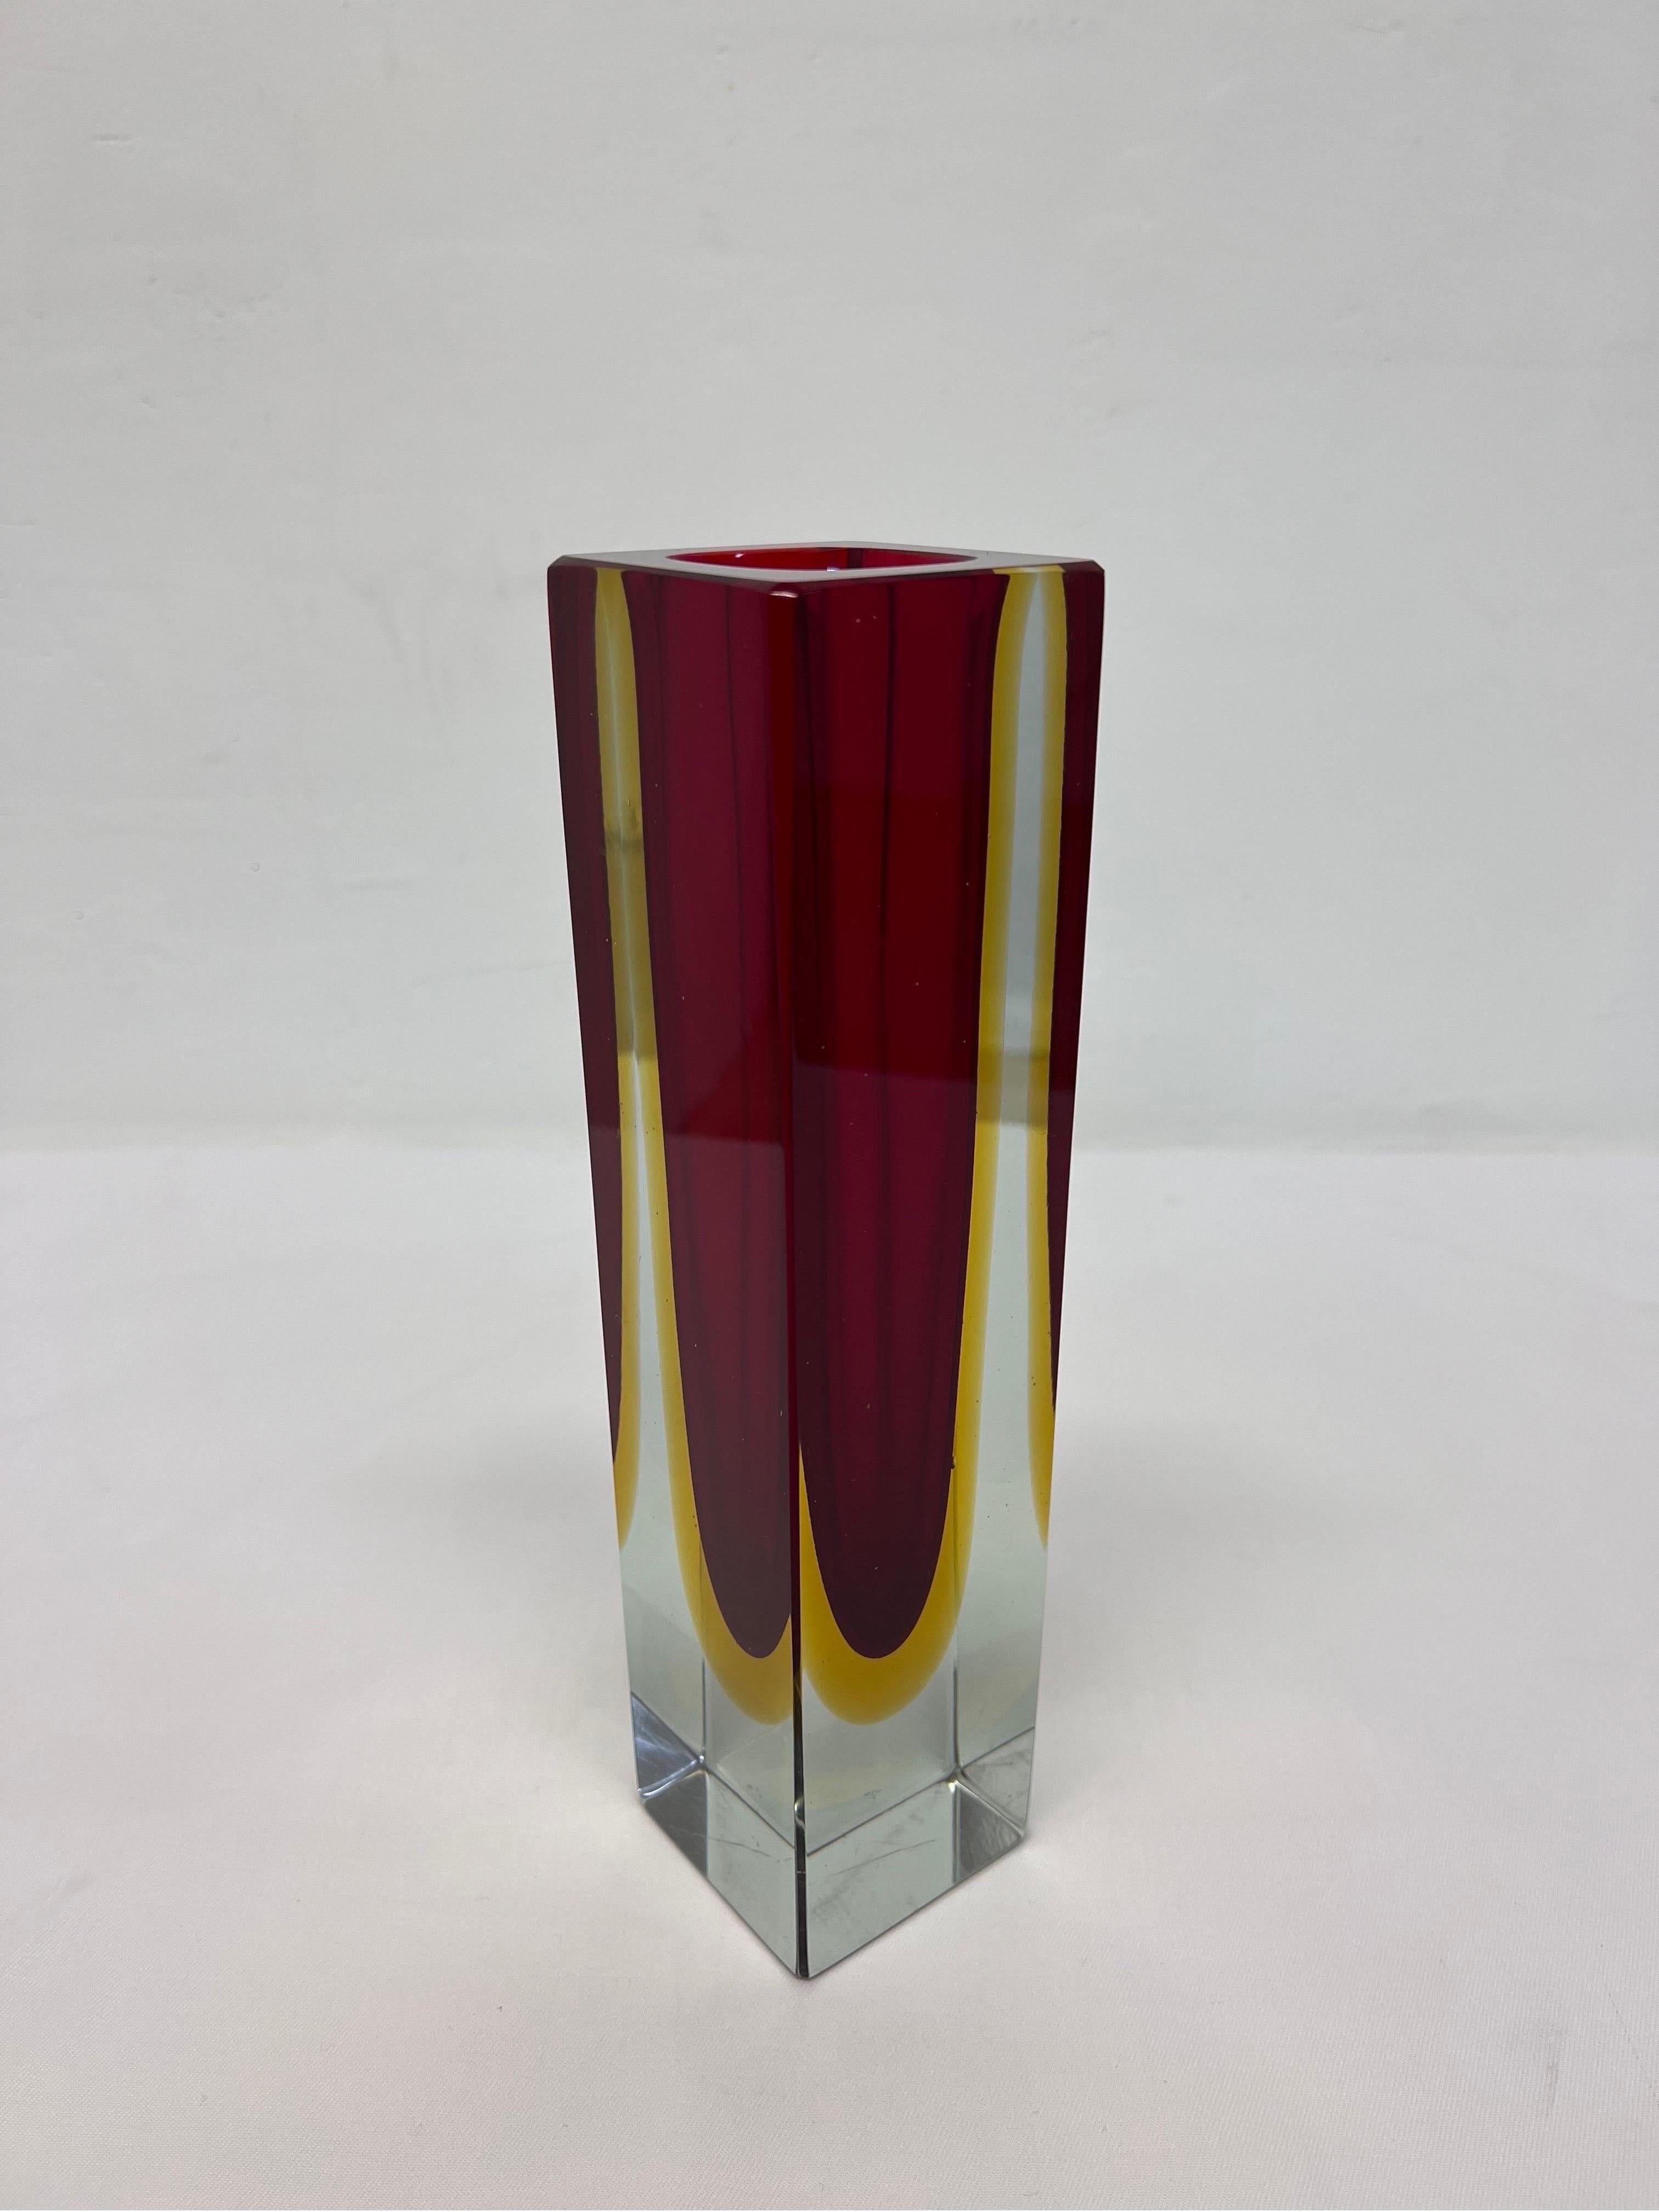 Murano Glass Alessandro Mandruzzato Hand Worked Red and Yellow Sommerso Block Vase For Sale